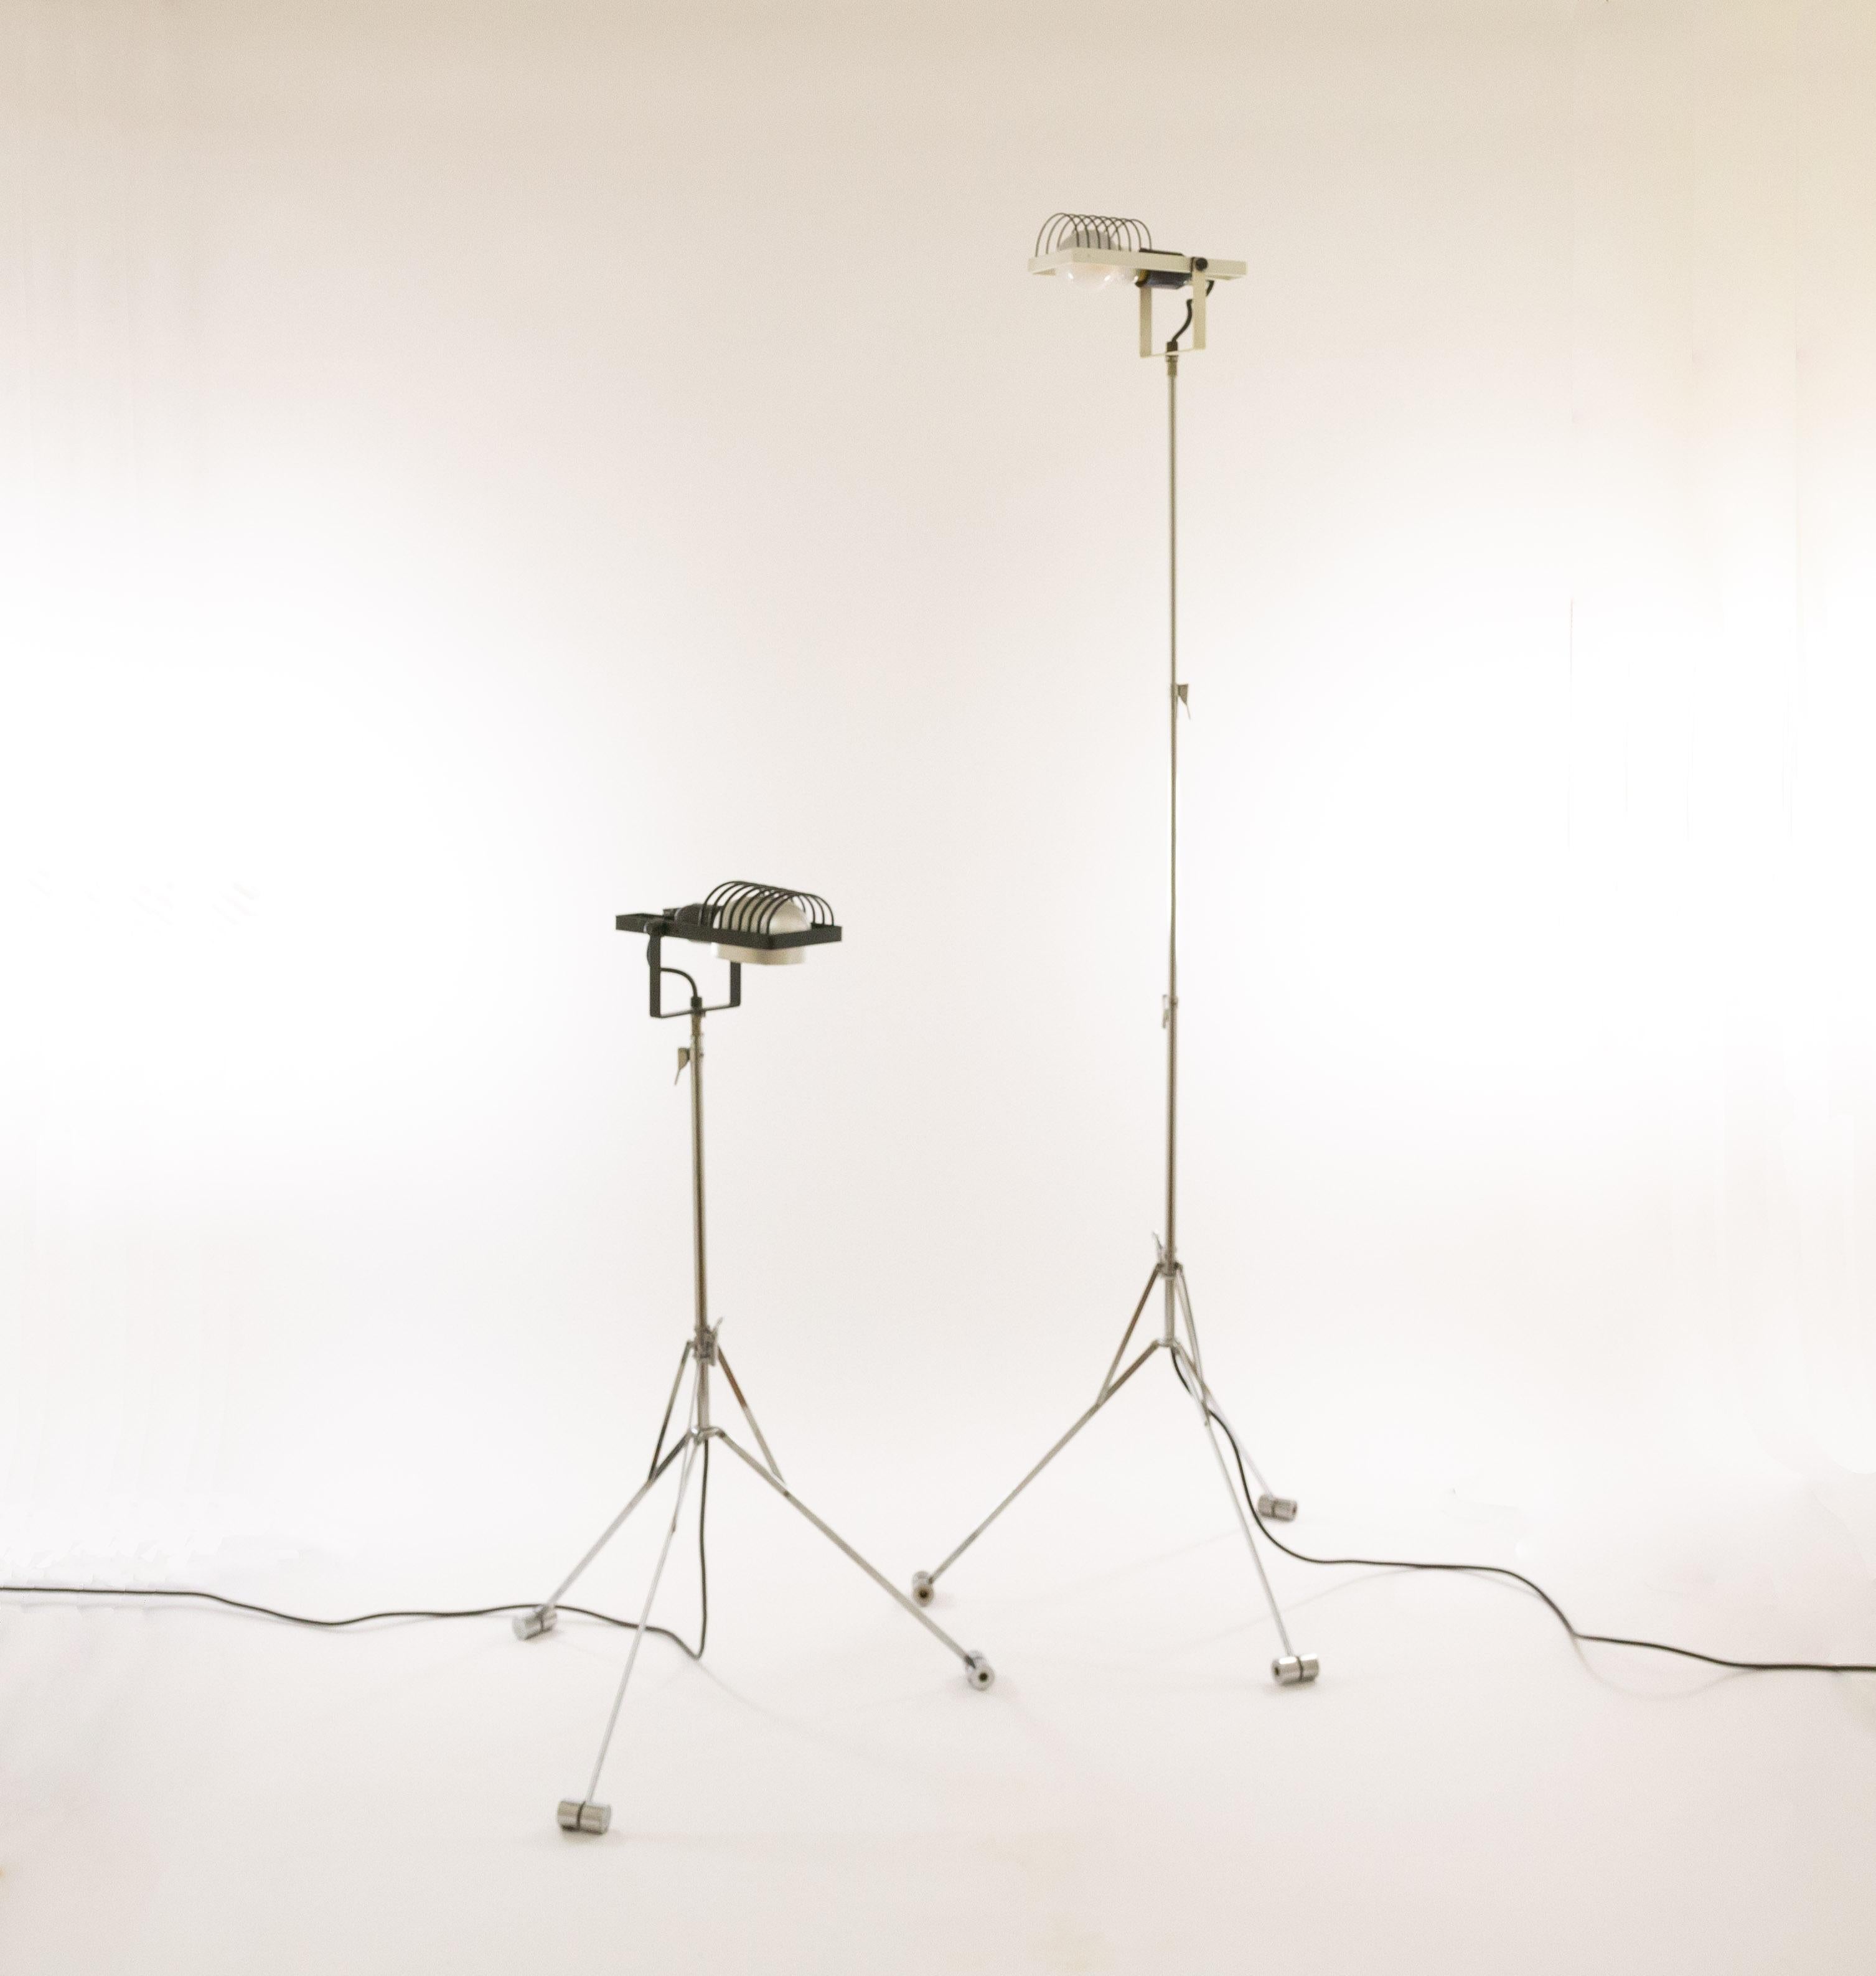 A pair of Sintesi floor lamps designed by Ernesto Gismondi for Italian lighting company Artemide in 1975.

Like all models within the Sintesi series these floor lamps are flexible. The aluminium shade is completely directional. You can adjust the